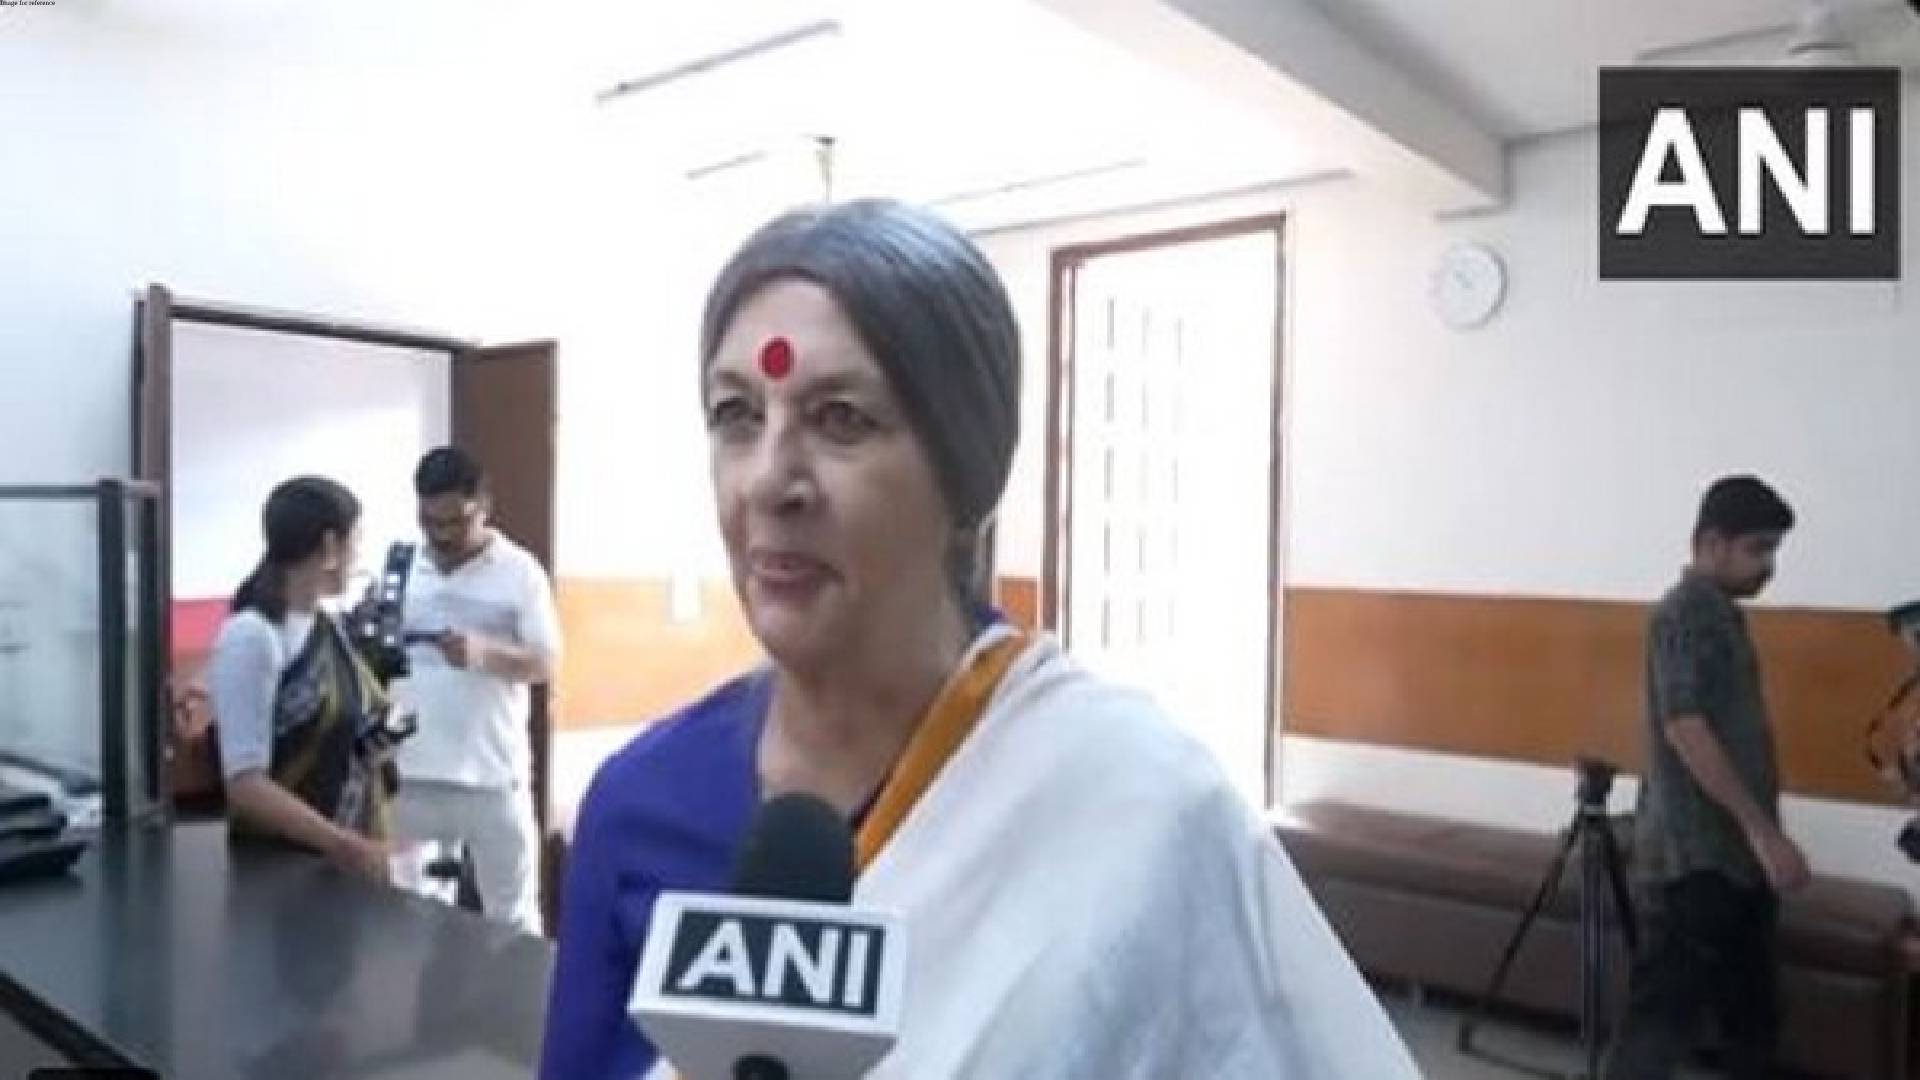 Exit poll predictions failing, says CPI(M) leader Brinda Karat as early trends show INDIA alliance's better performance